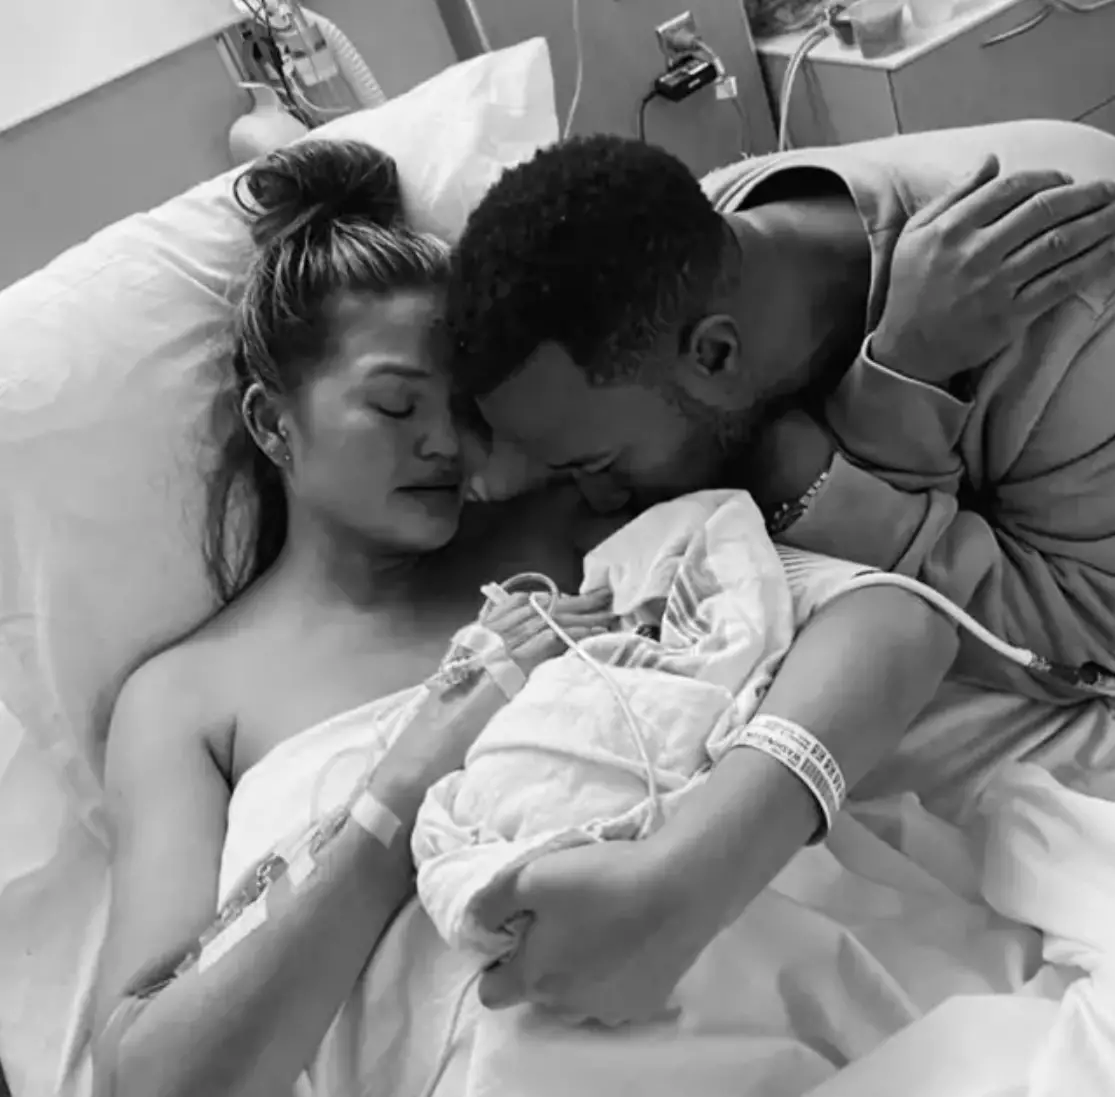 Chrissy Teigen shared pictures from hospital to her 34 million Instagram followers last year (